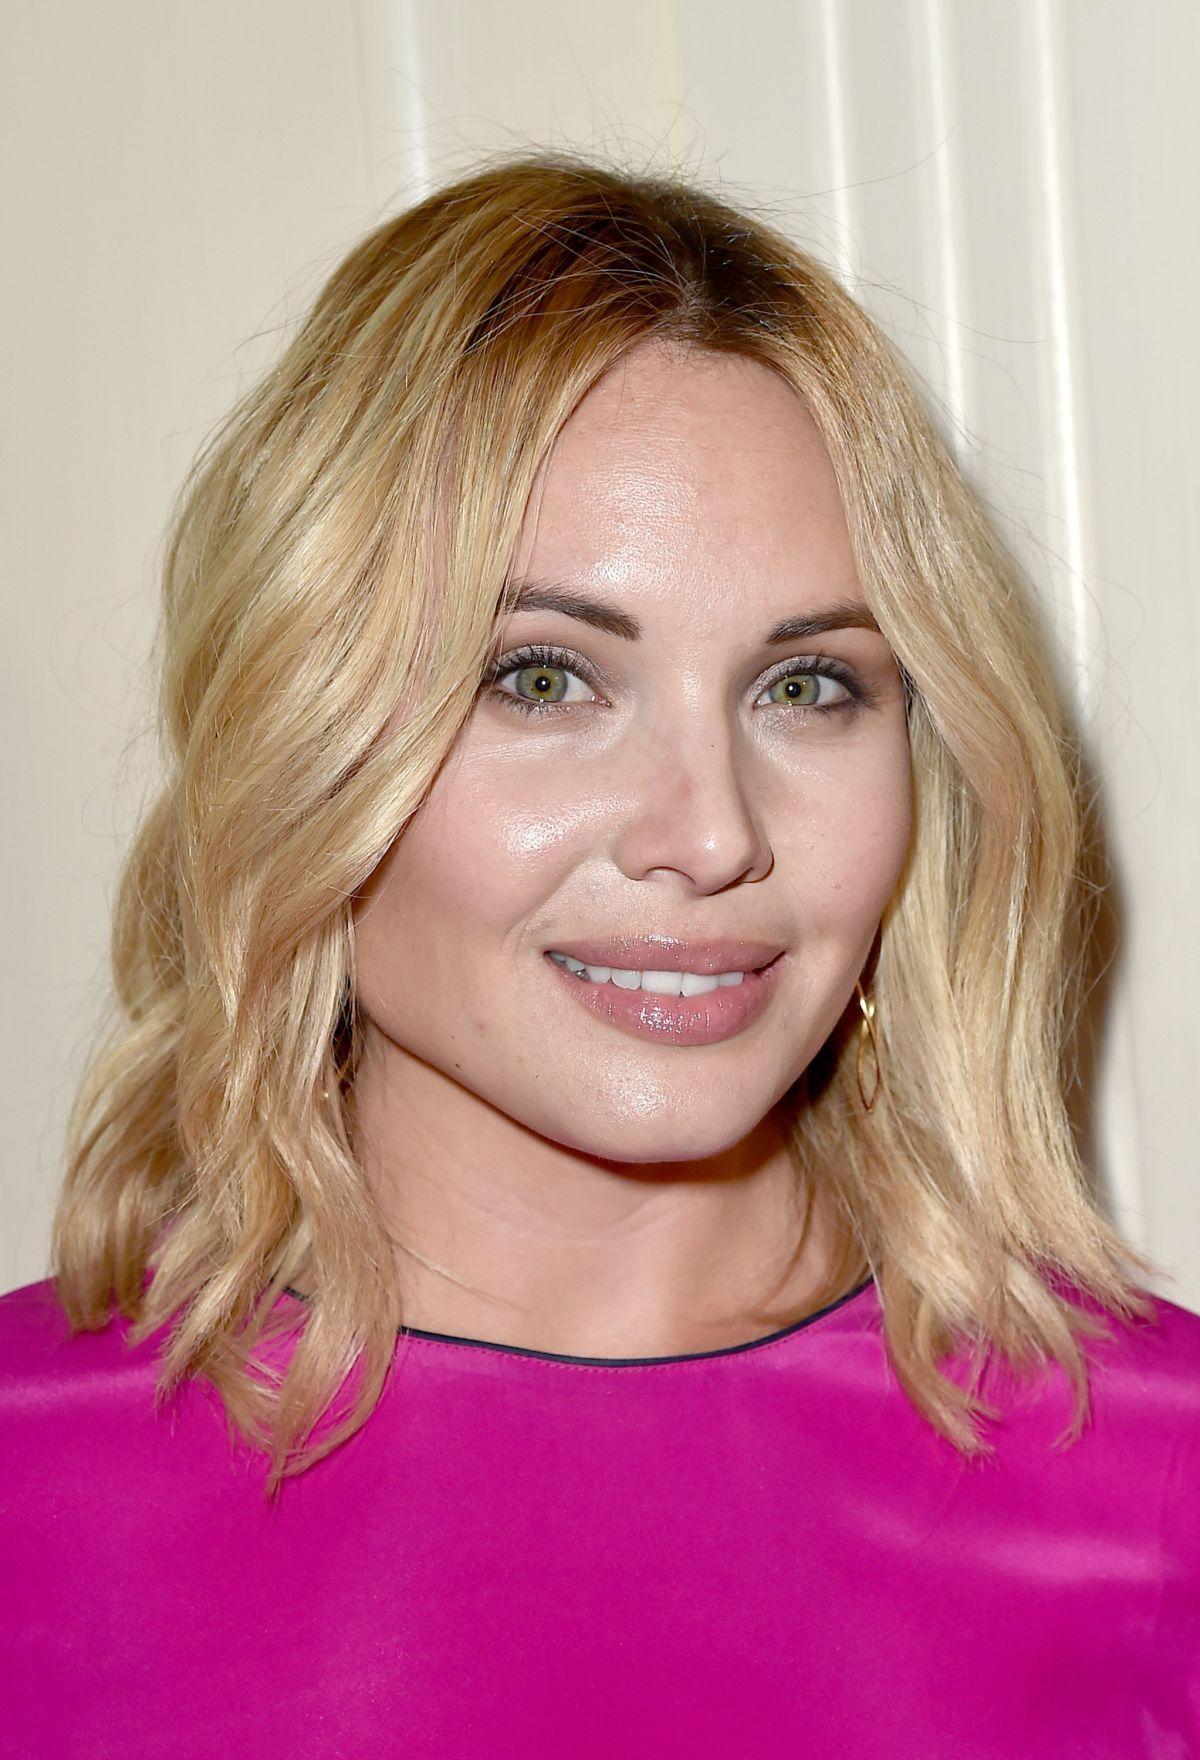 LEAH PIPES at Thewrap's 2015 Emmy Party in West Hollywood.